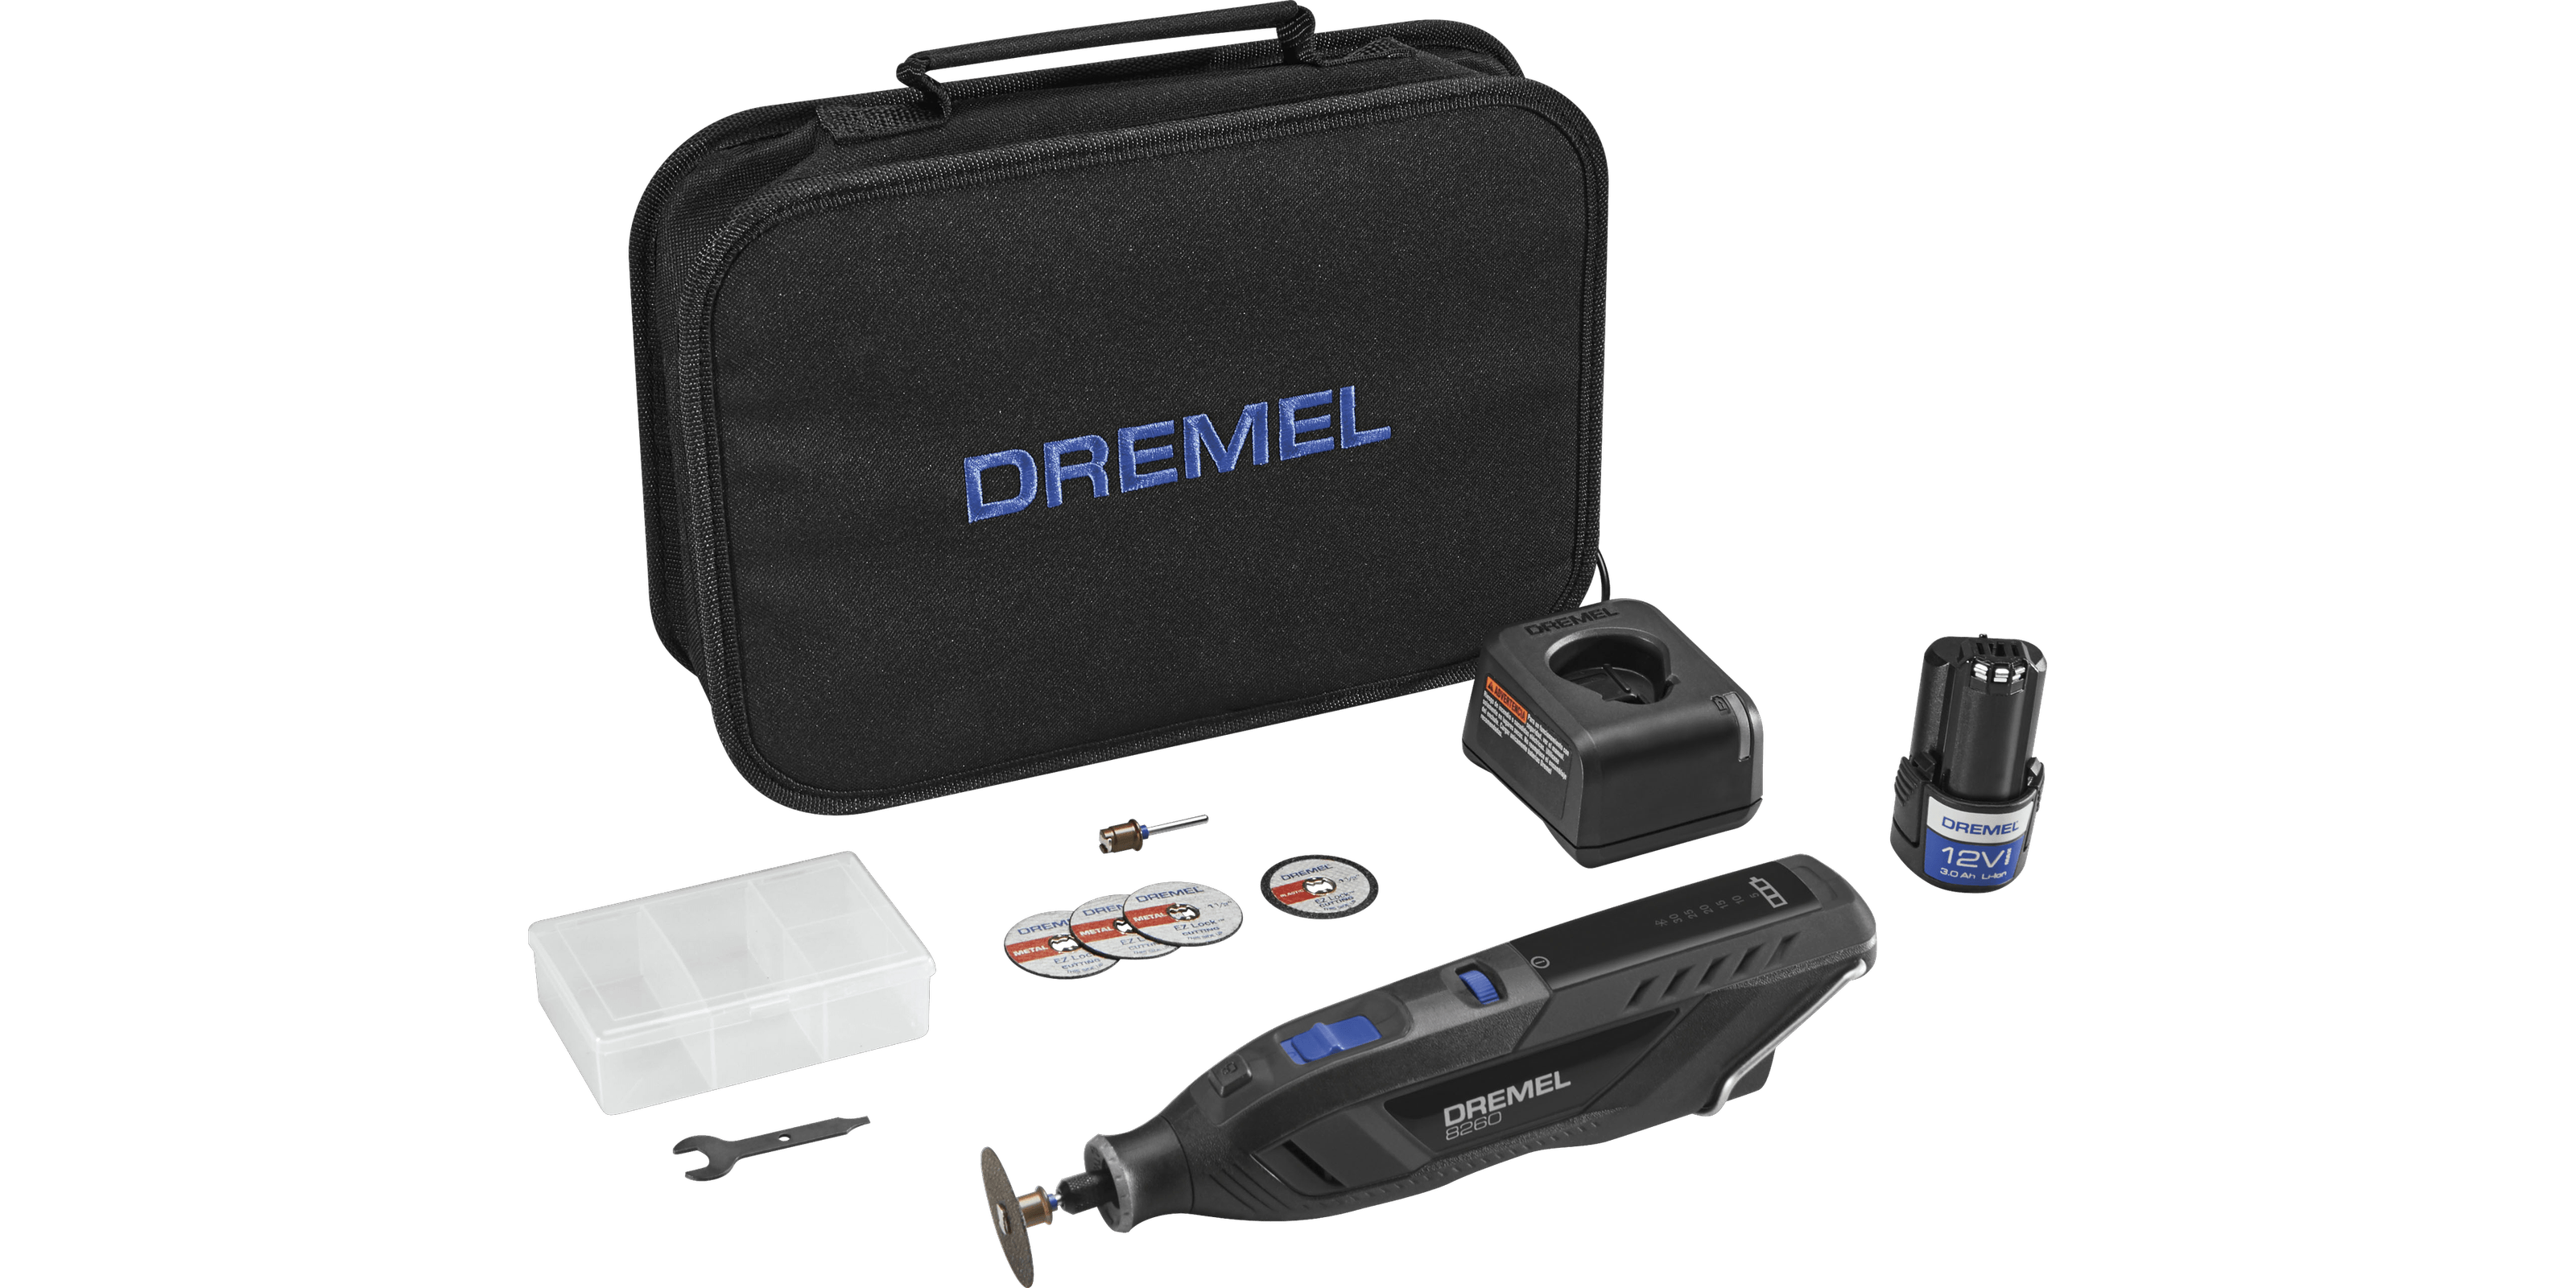 DREMEL LITE REVIEW! Not just for crafts! 